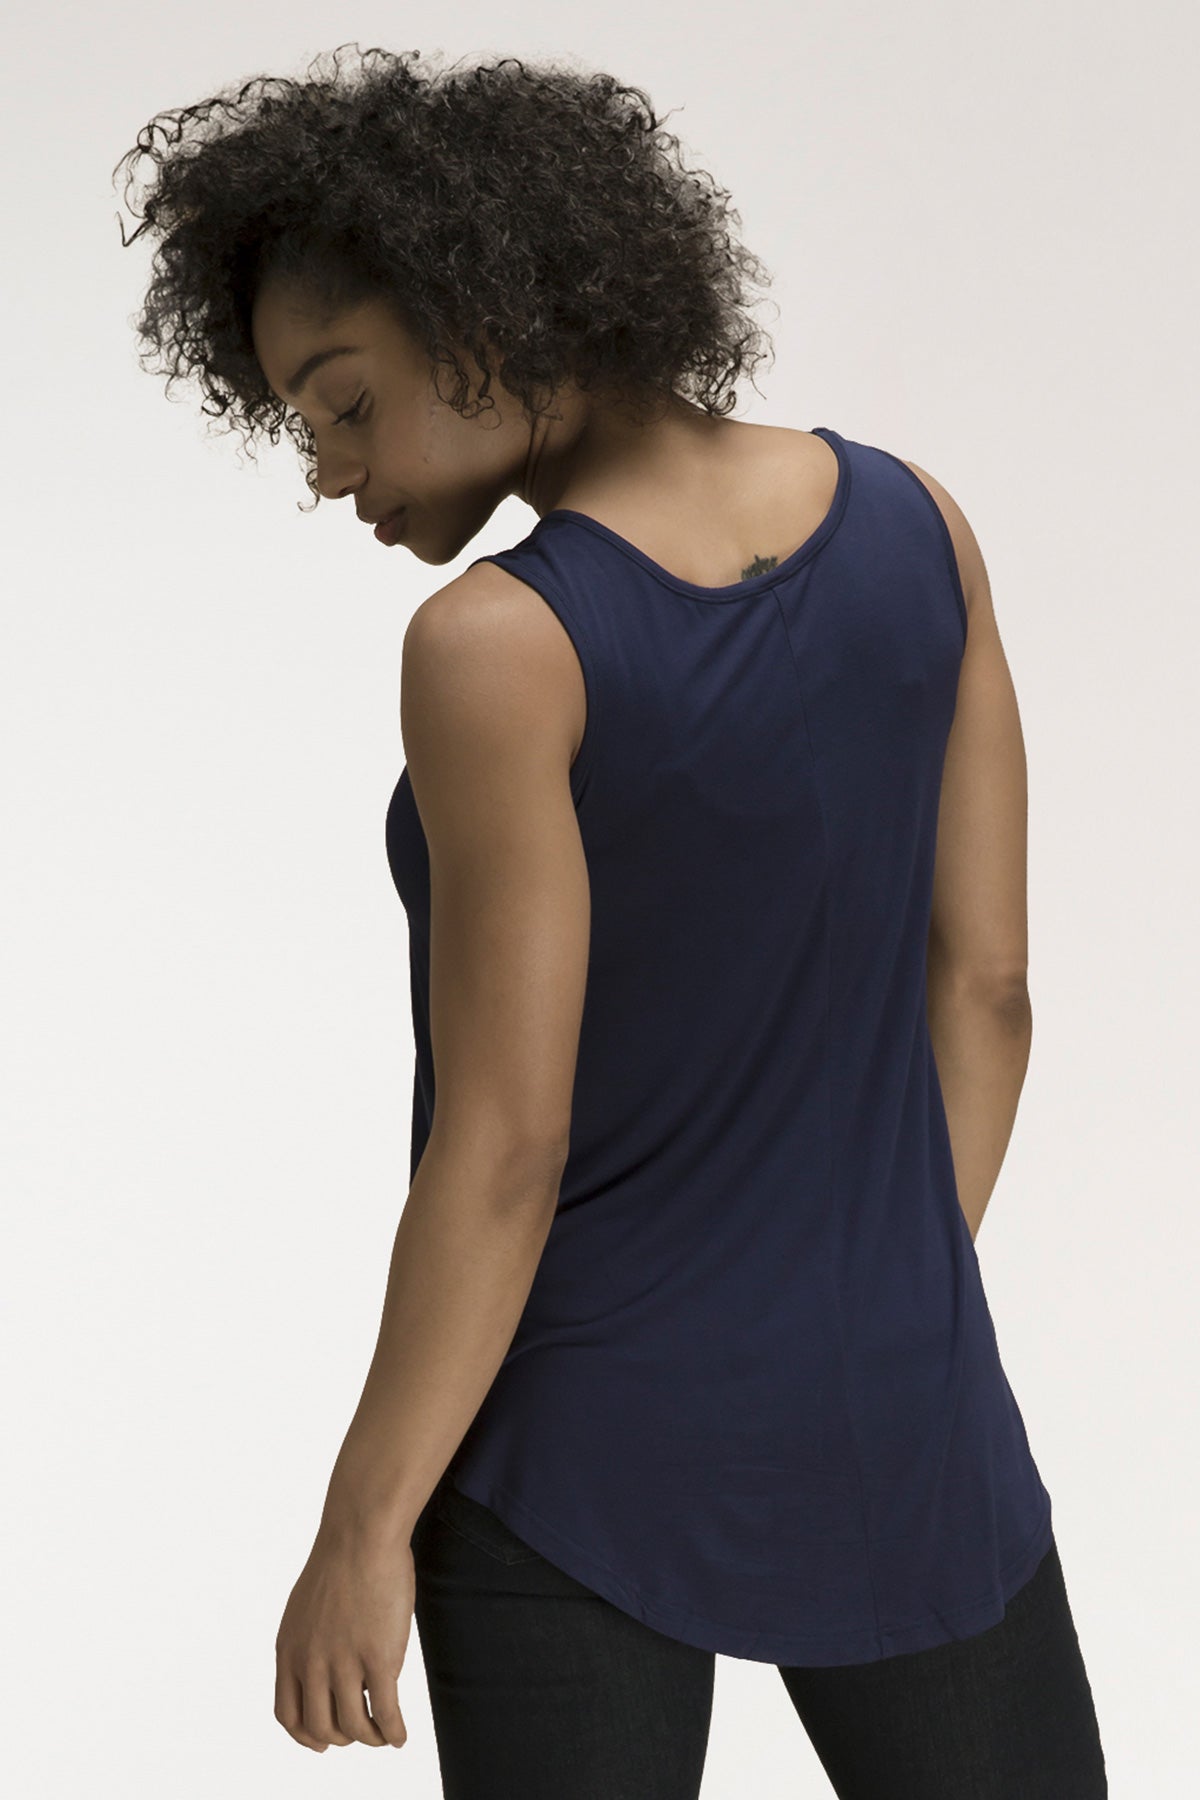 A woman standing with her back turned, looking back over her shoulder, wearing Yala Justine Bamboo Tunic Tank Top in Navy